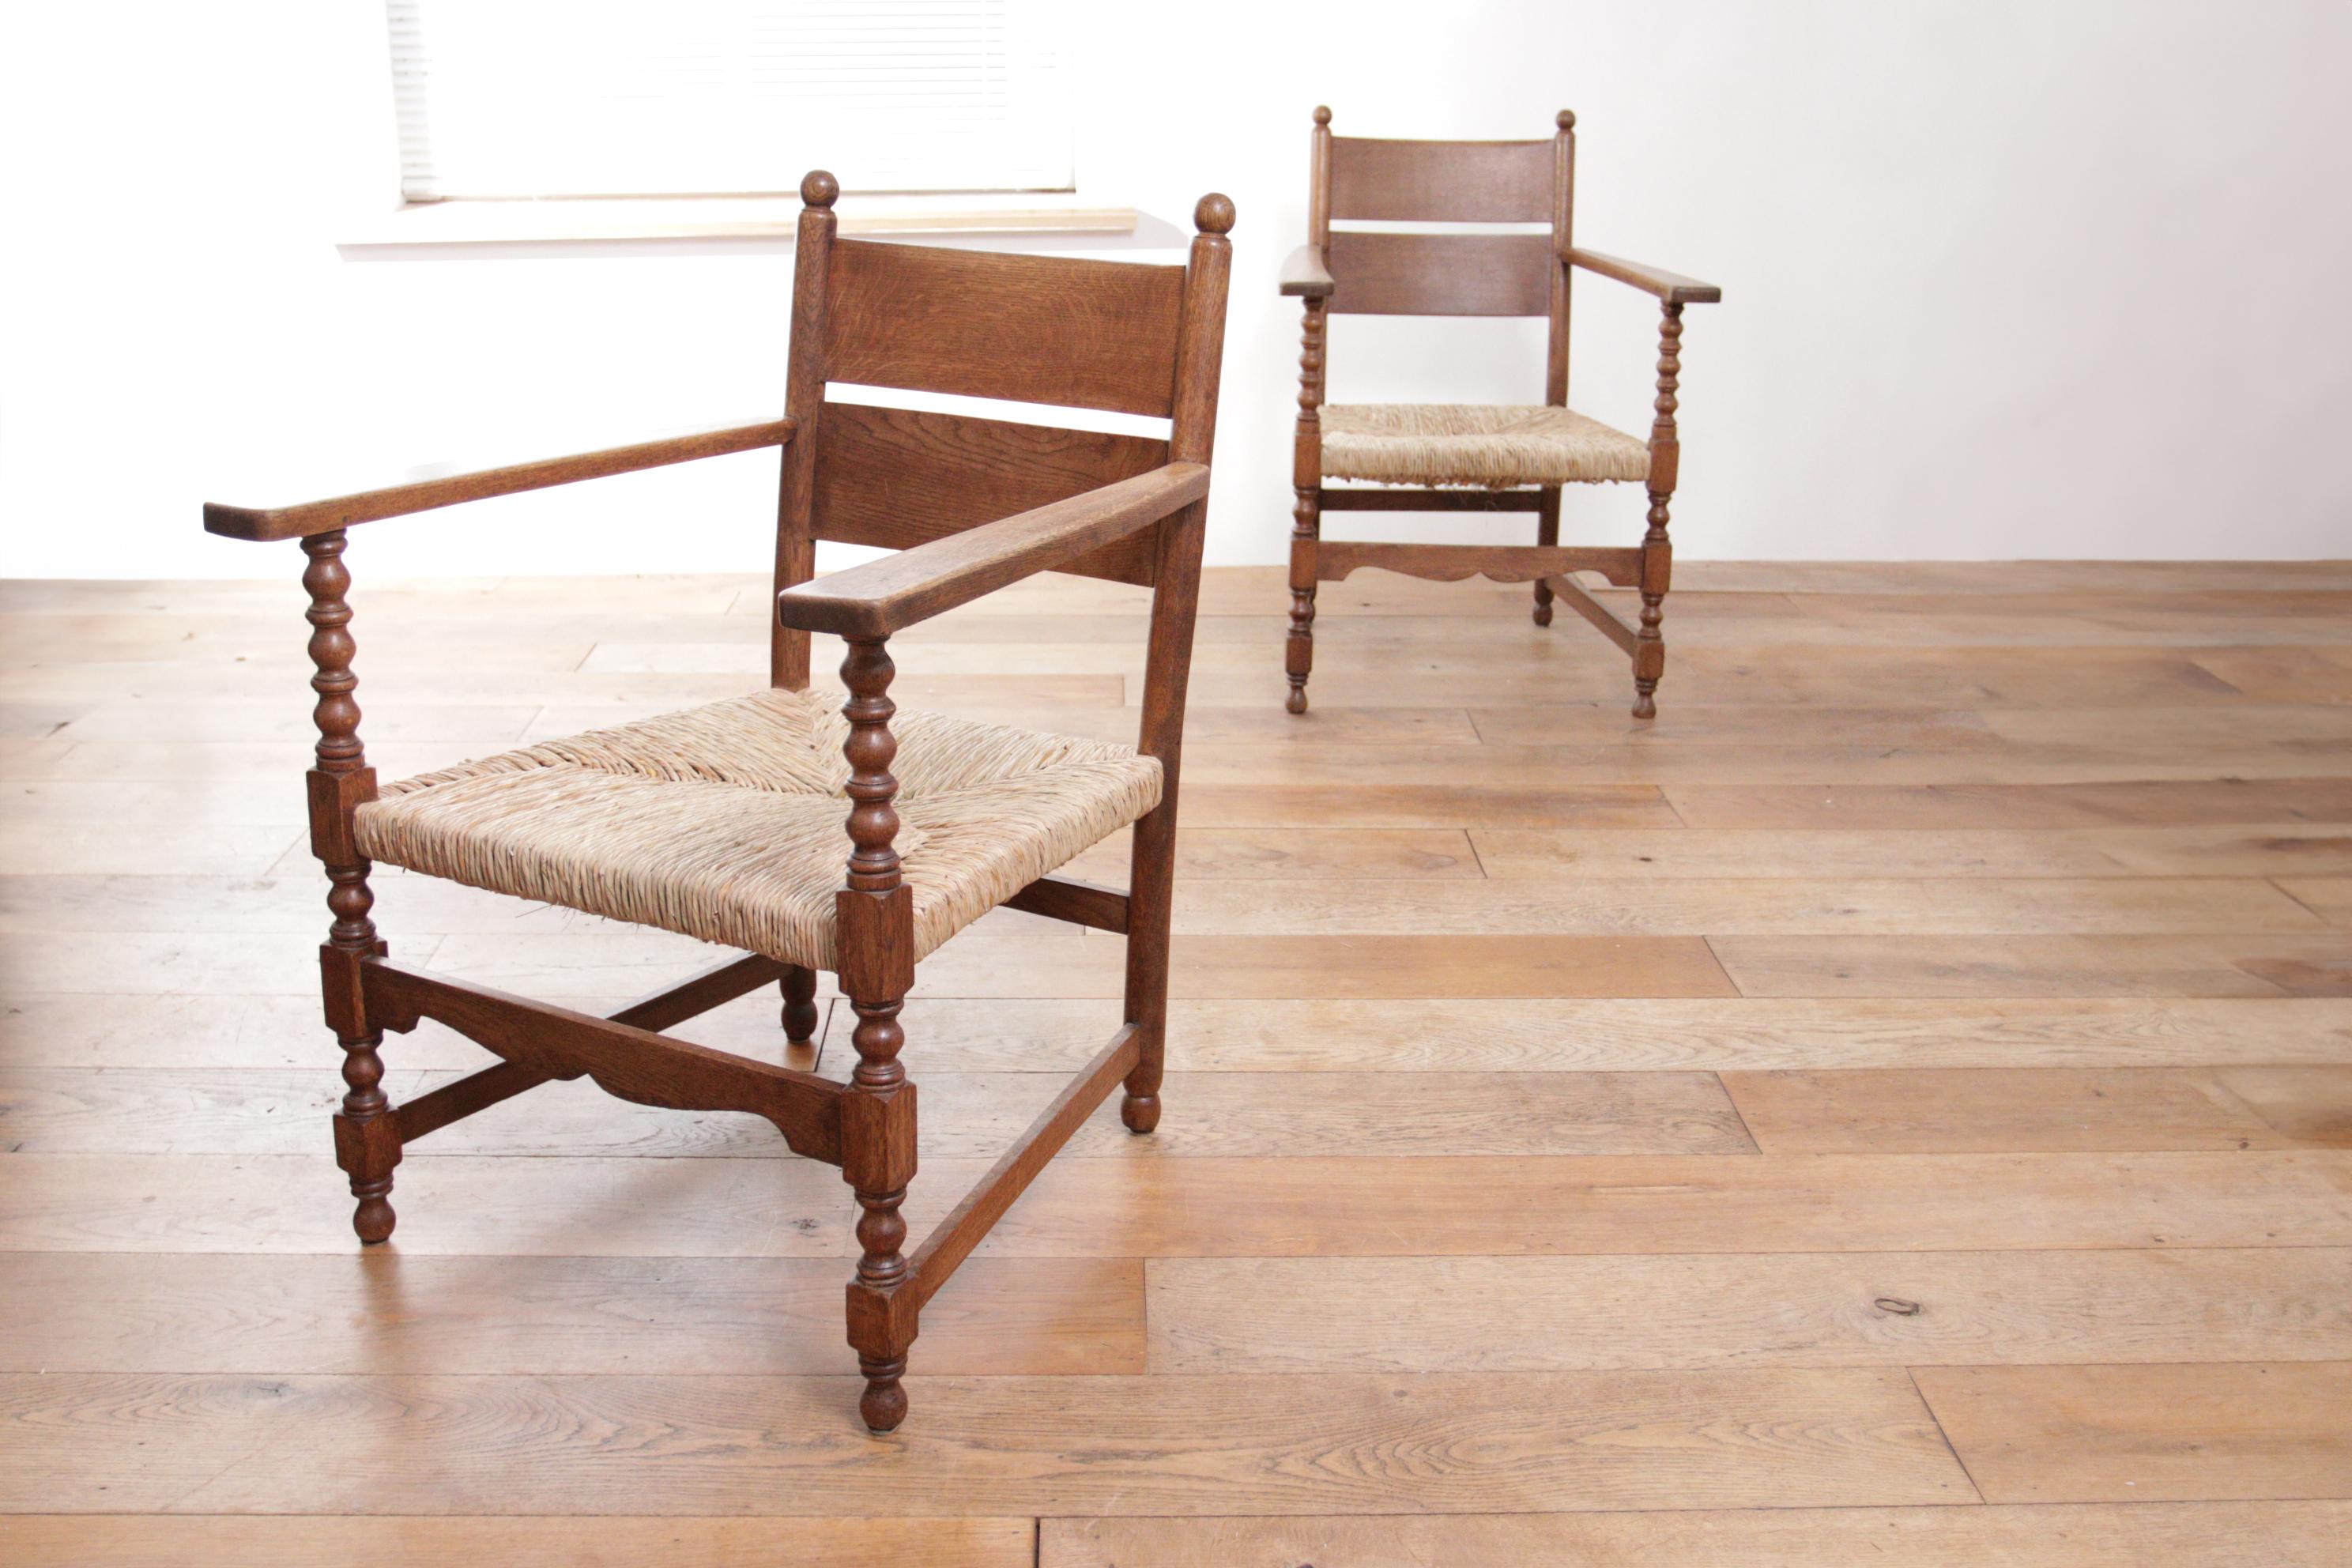 Beautiful armchair from the 1930s made of solid oak with a wicker woven seat.
Fit perfectly with the style of designers such as Charlotte Perriand and Charles Dudouyt.
Comfortable and a very nice warm appearance due to the use of only natural